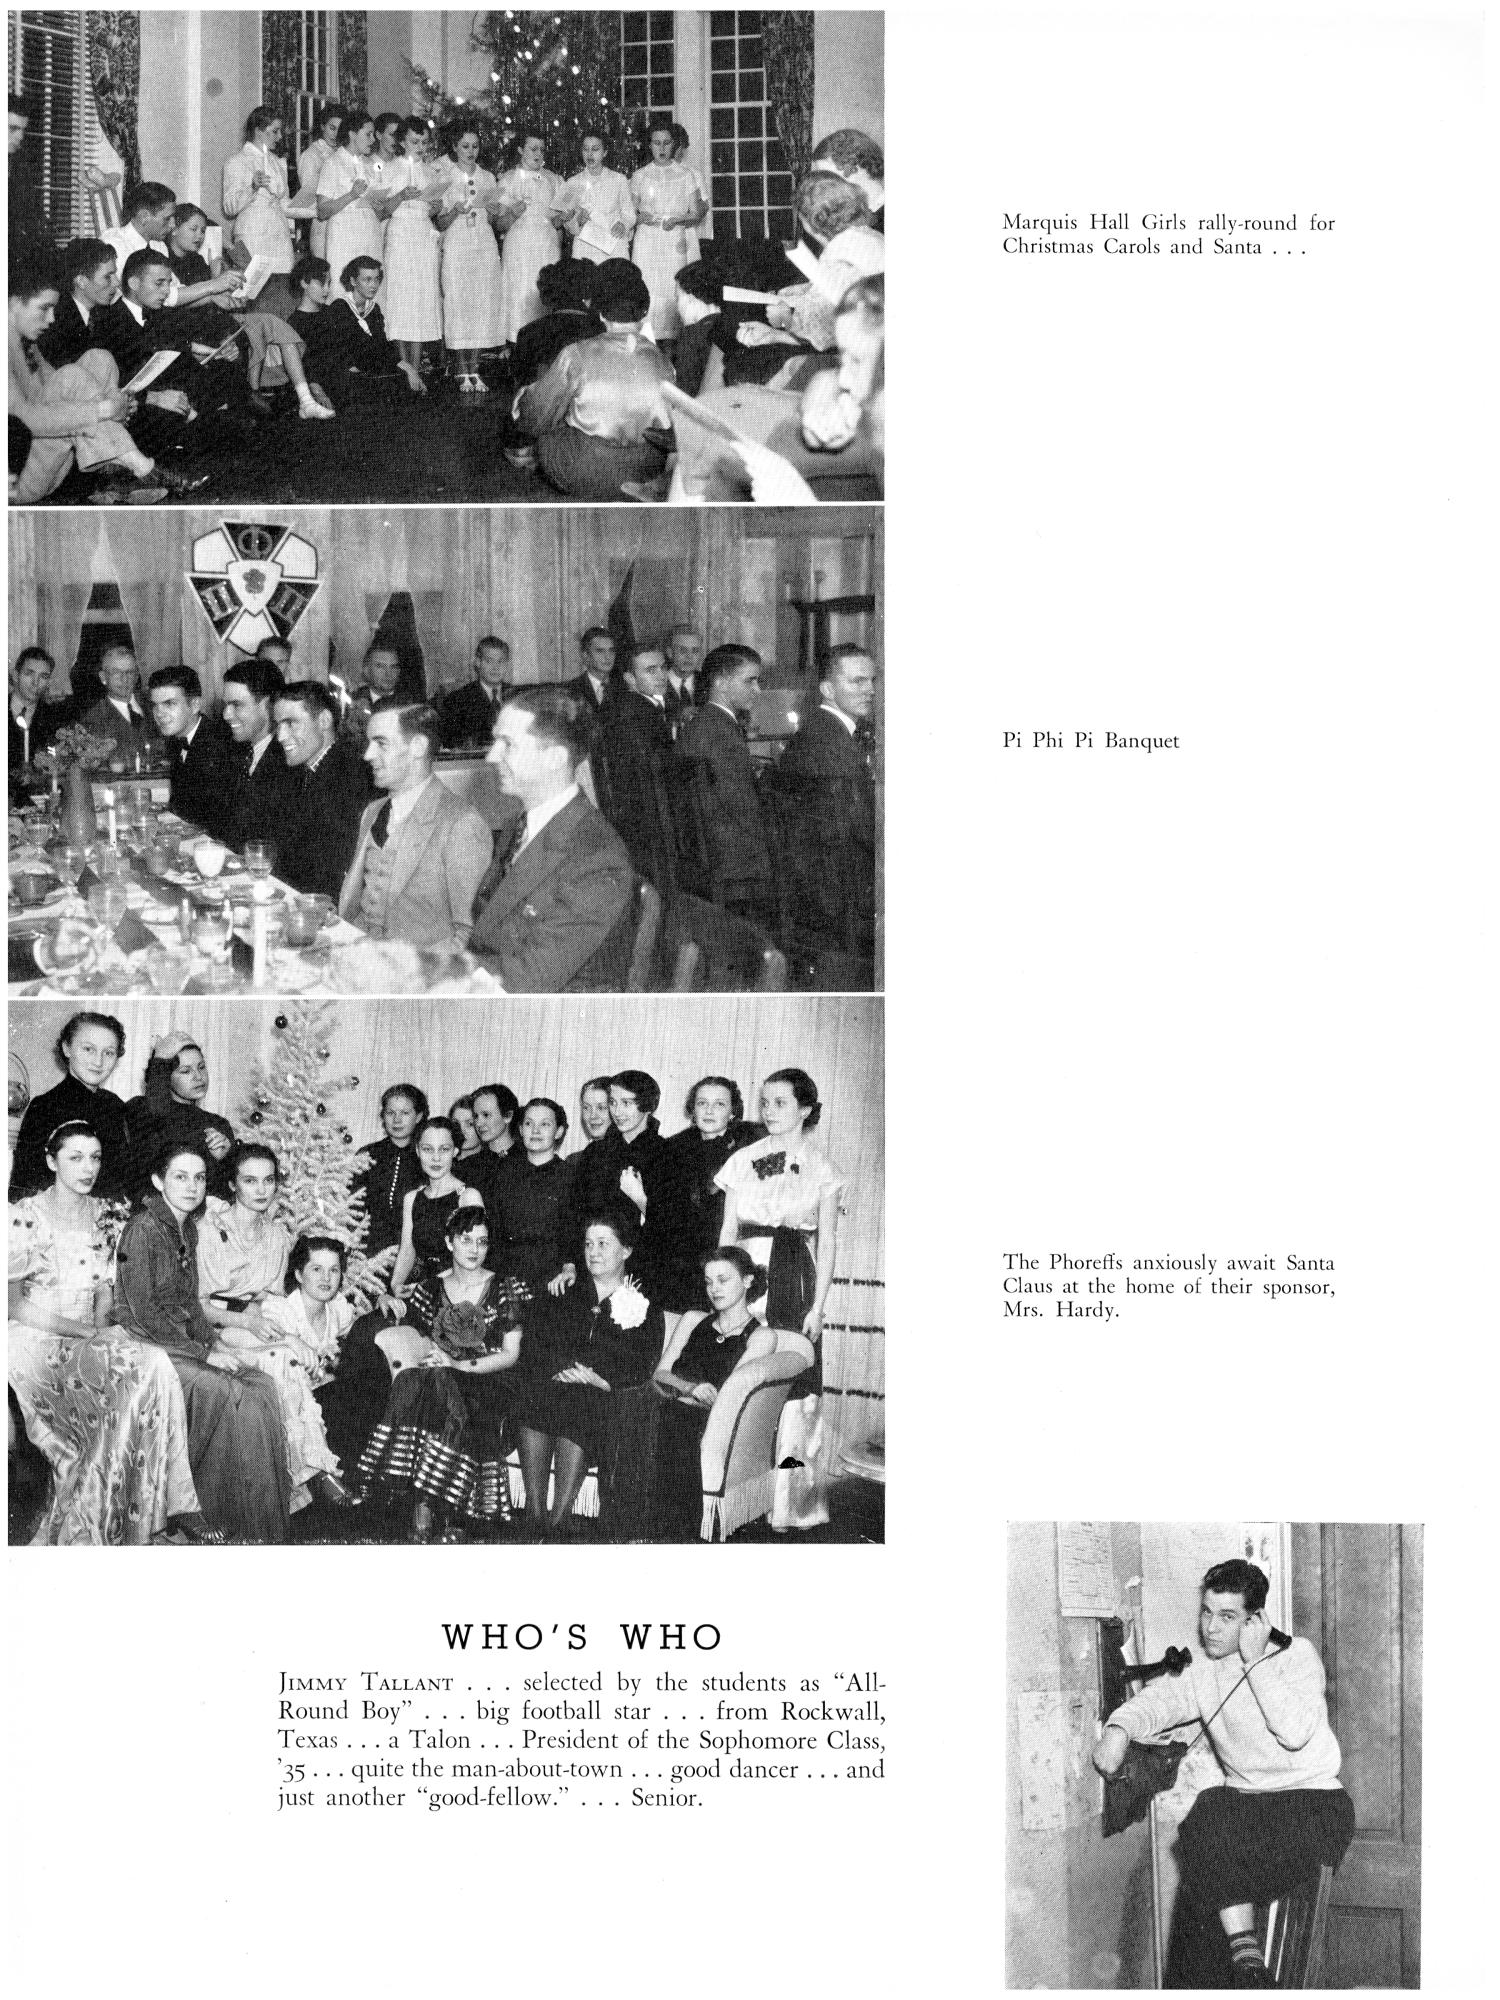 The Yucca, Yearbook of North Texas State Teacher's College, 1937
                                                
                                                    59
                                                